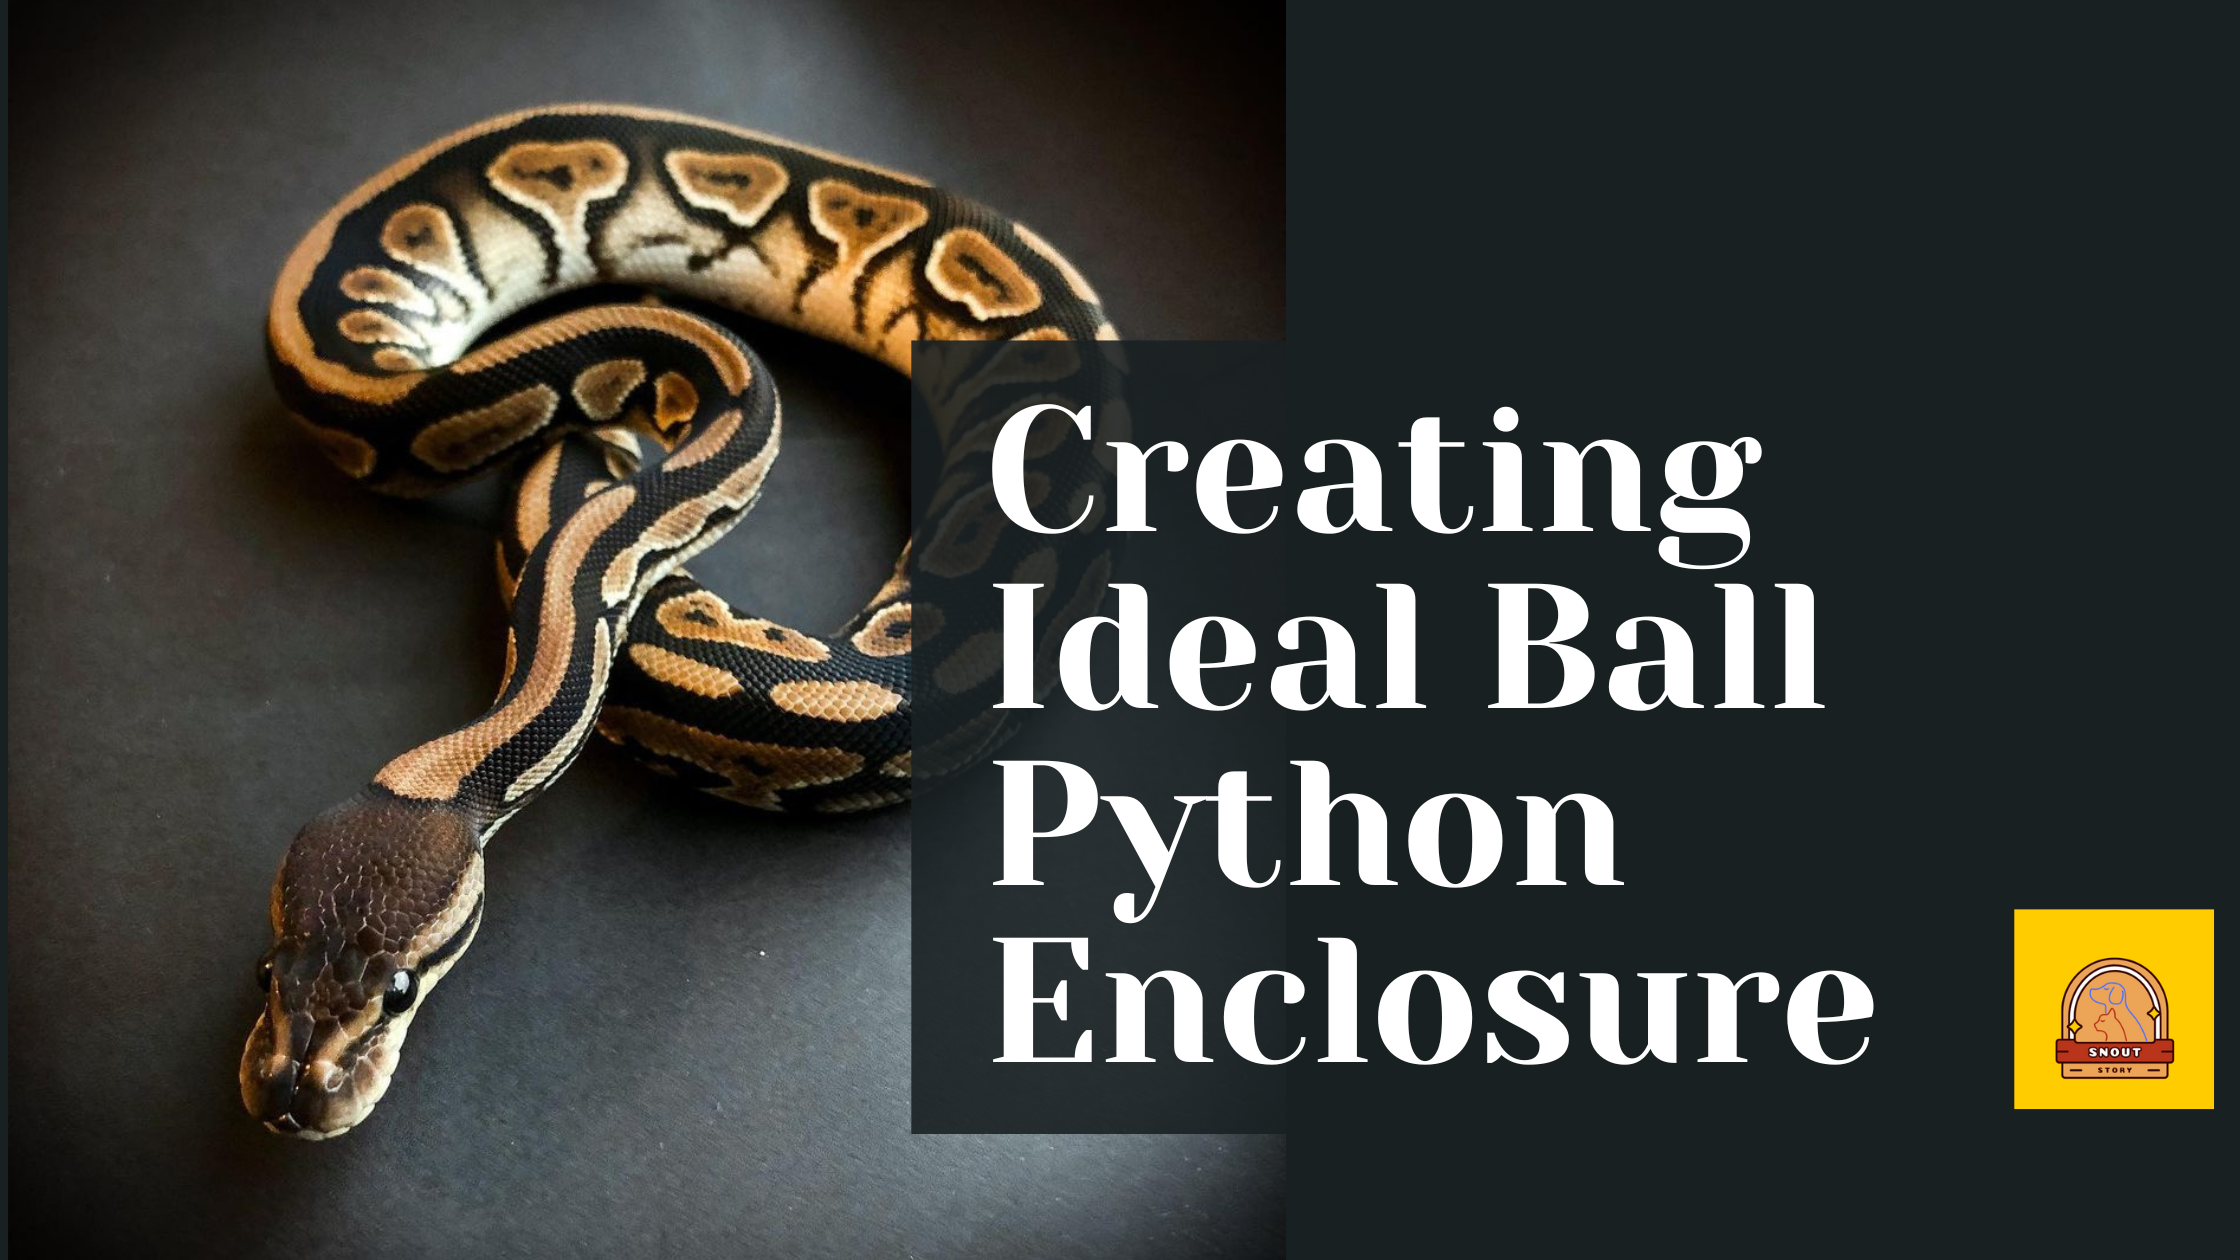 Ball Python Enclosure and Habitat: How to Create an ideal enclosure